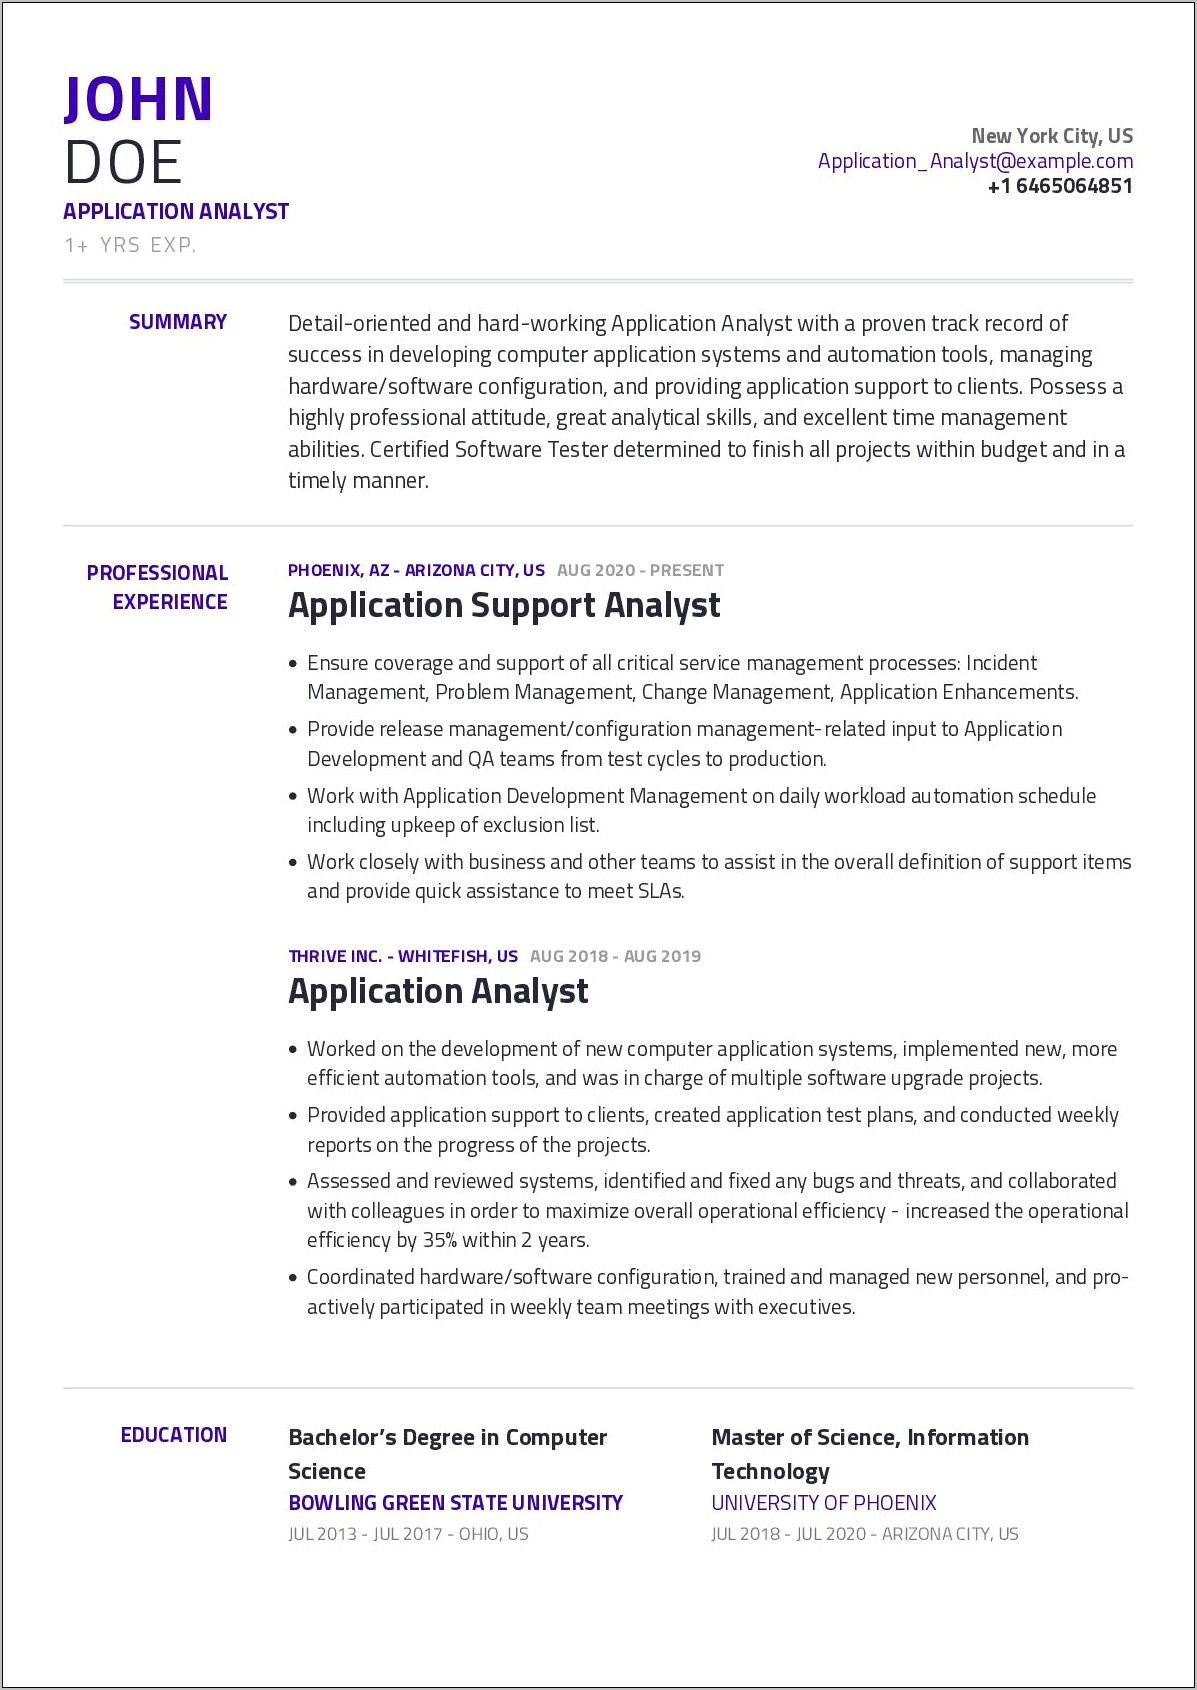 Technical Support Analyst Job Resume